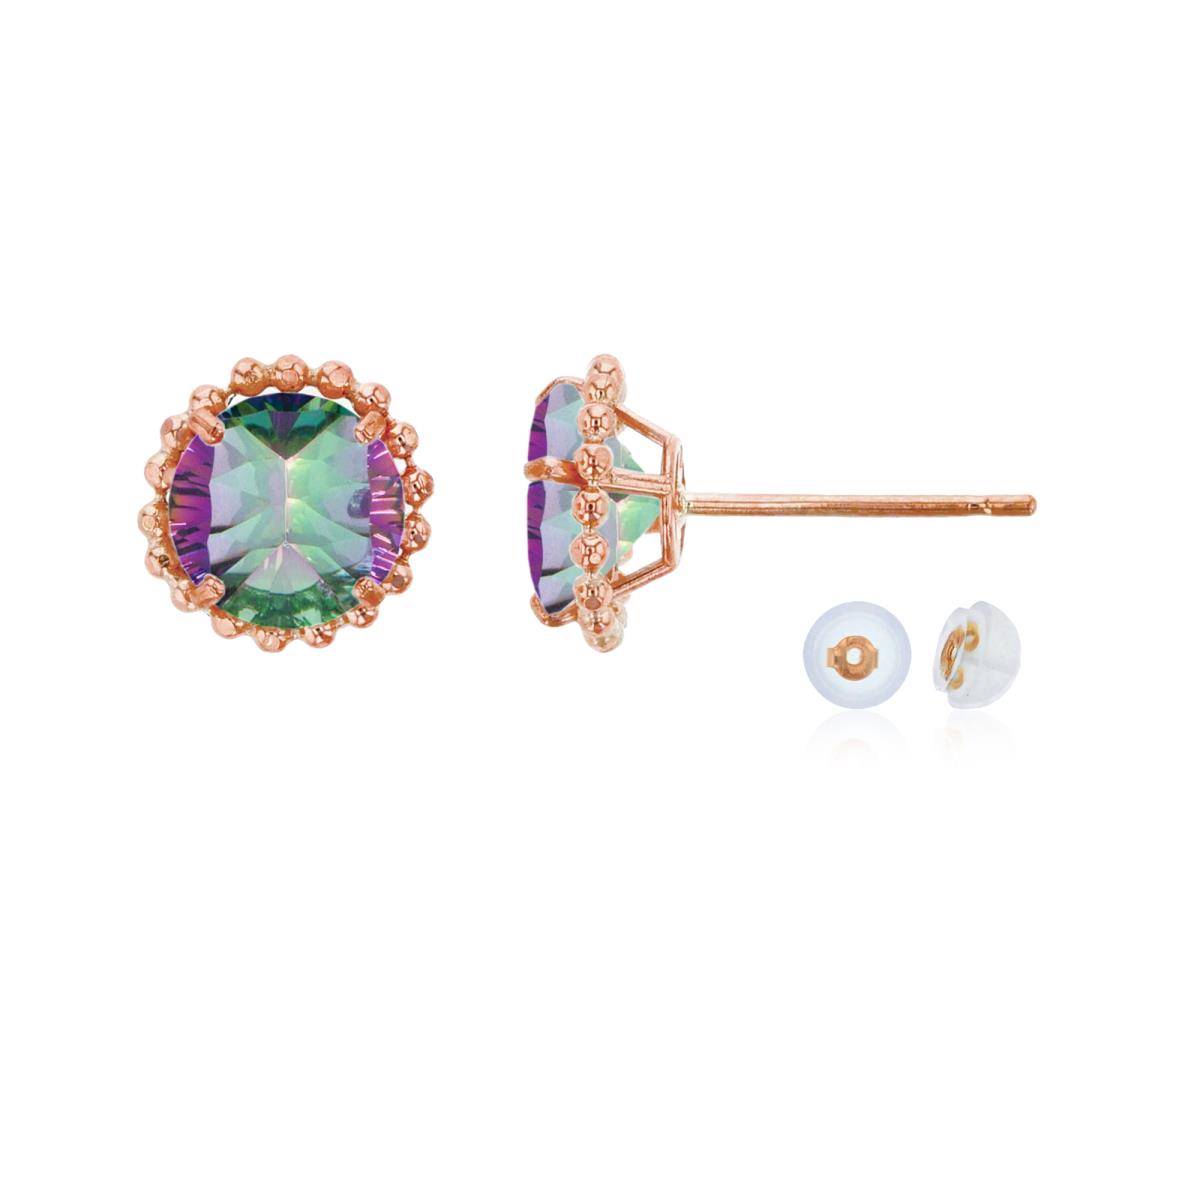 10K Rose Gold 5mm Rd Mystic Green Quartz with Bead Frame Stud Earring with Silicone Back